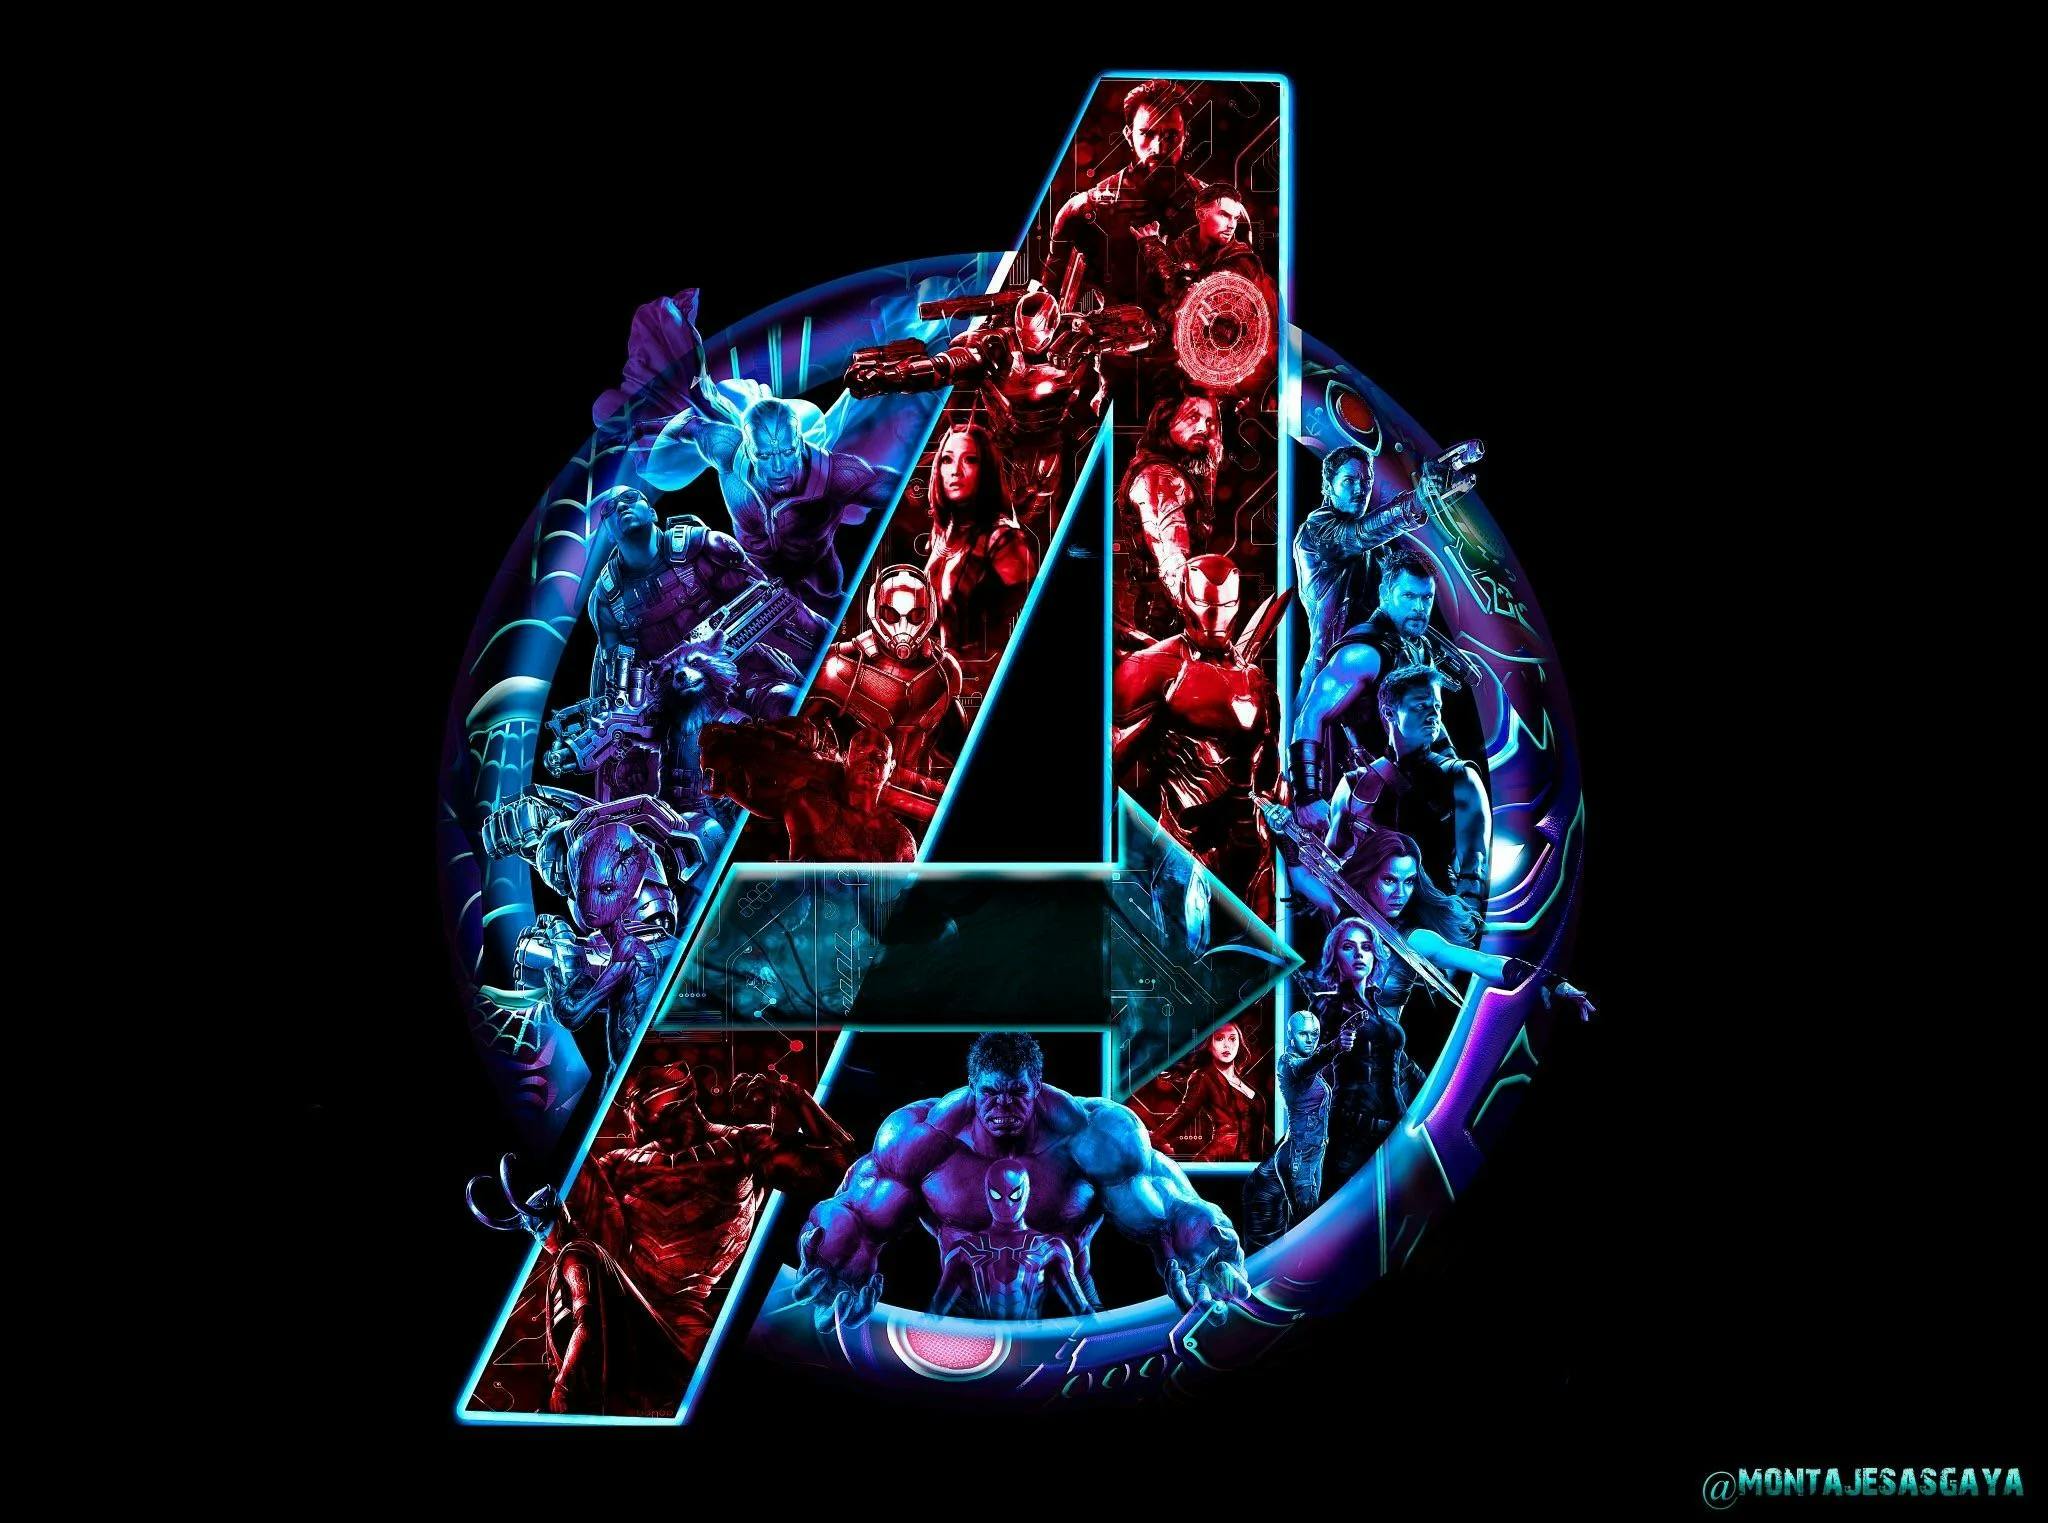 The Avengers: A Marvel Universe of Our Own